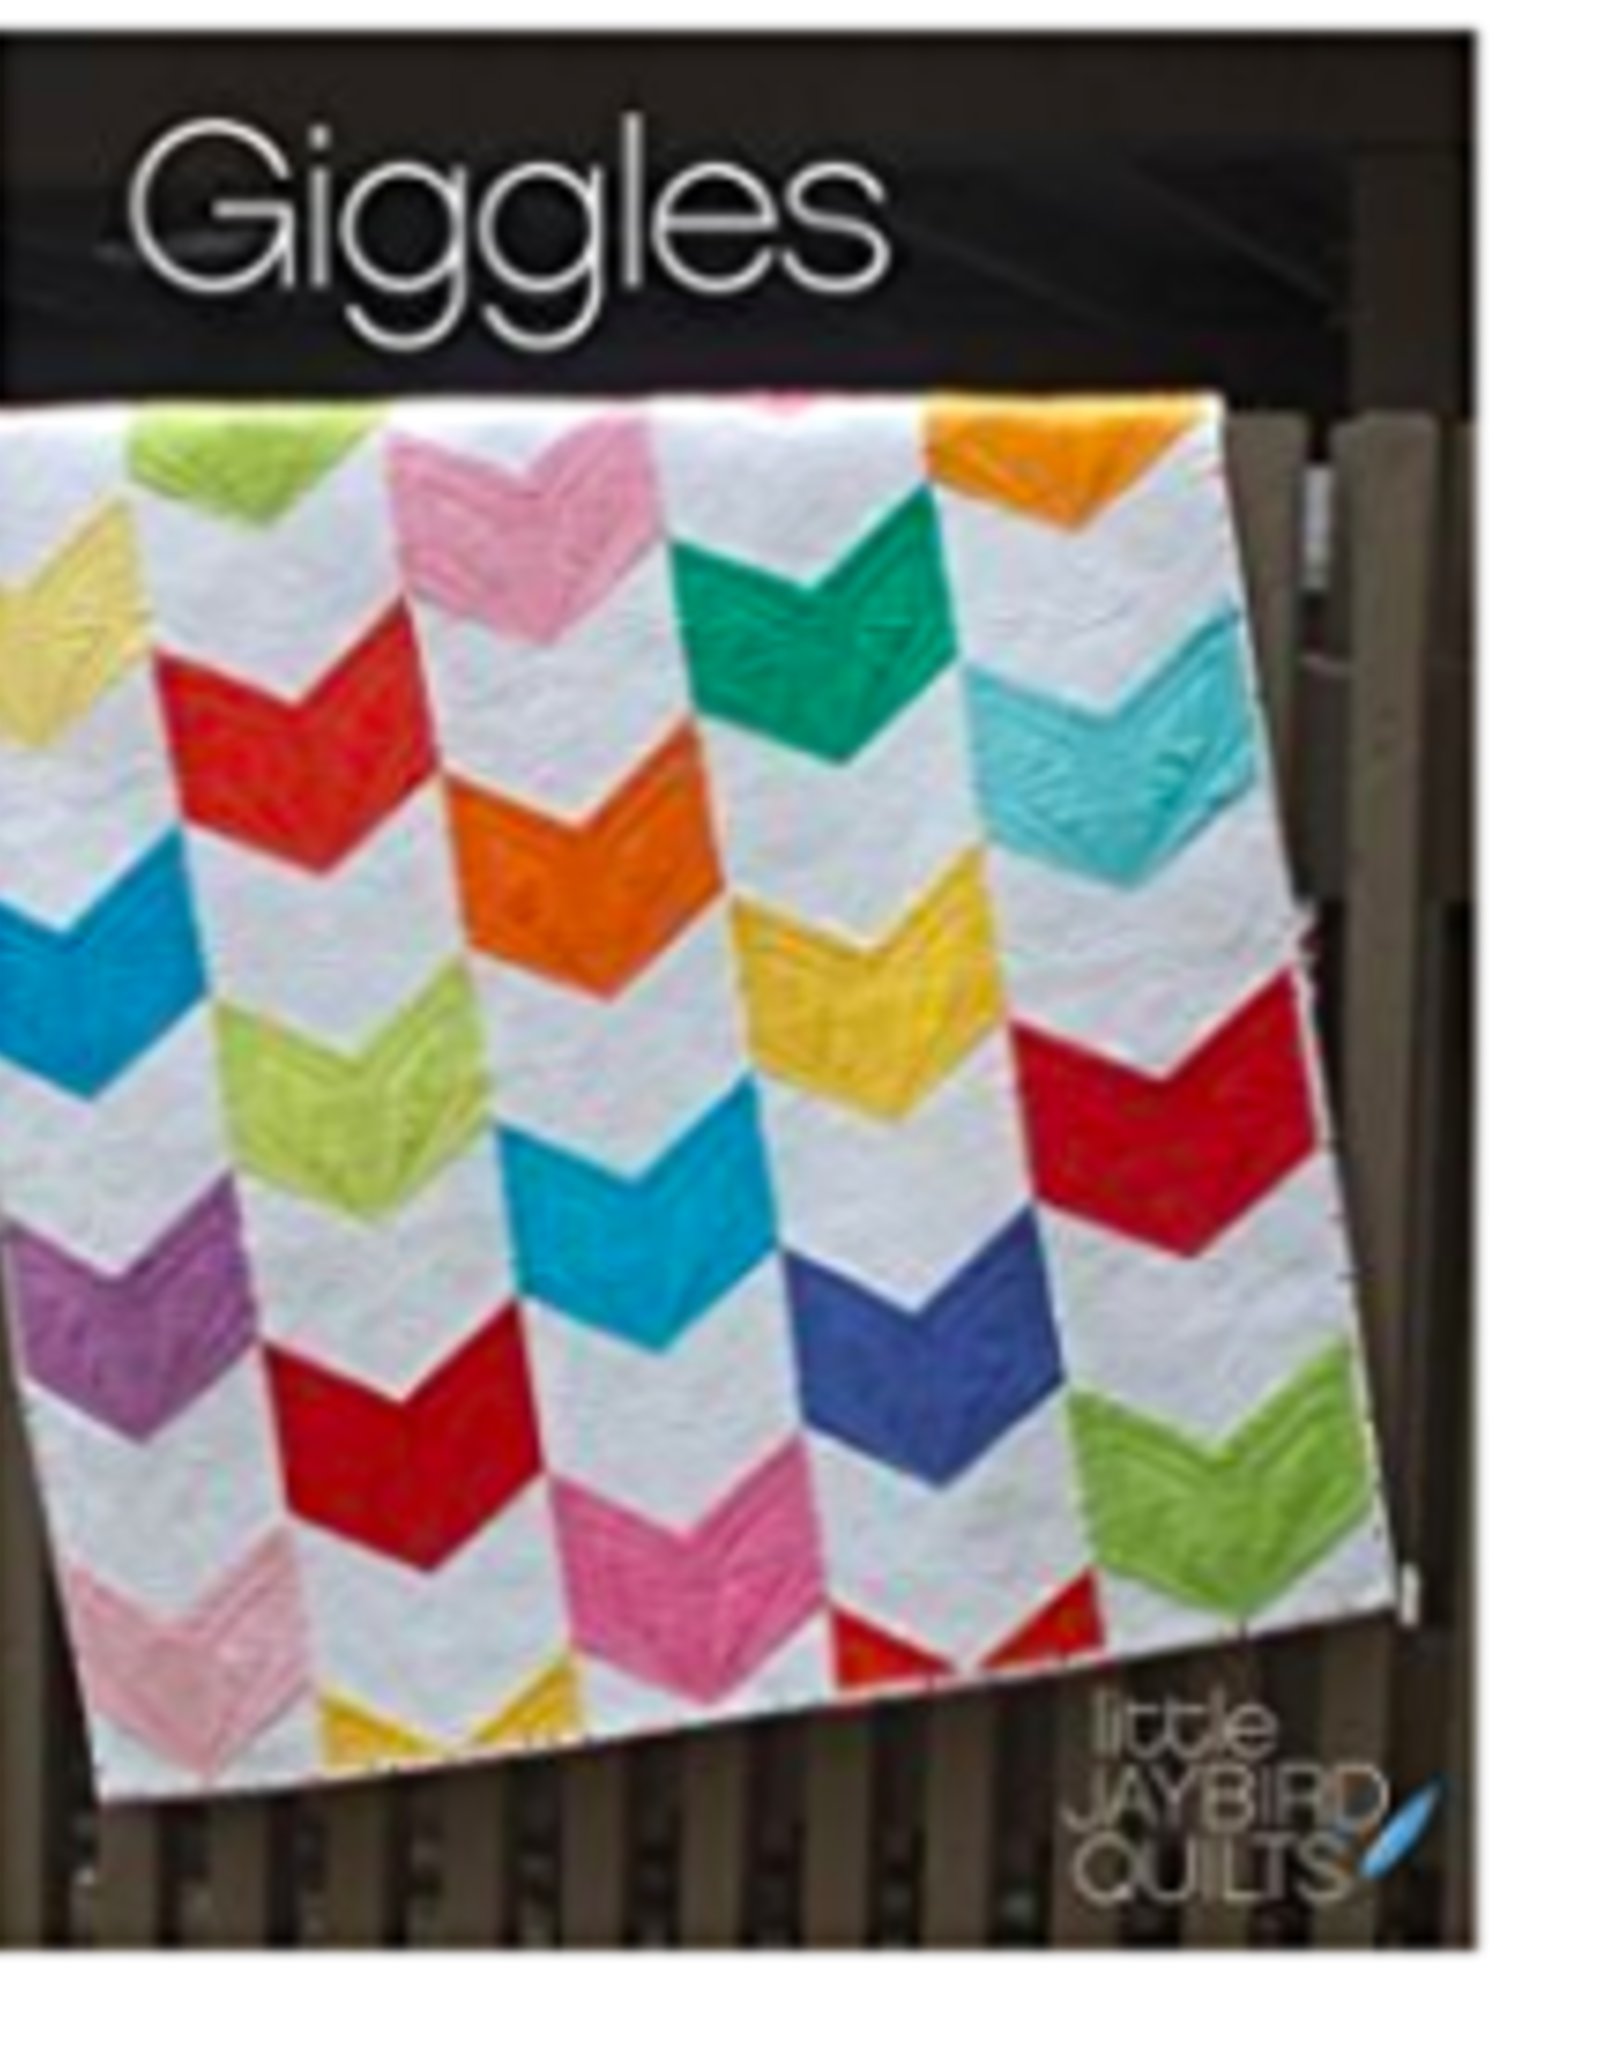 Giggles Baby Quilt pattern